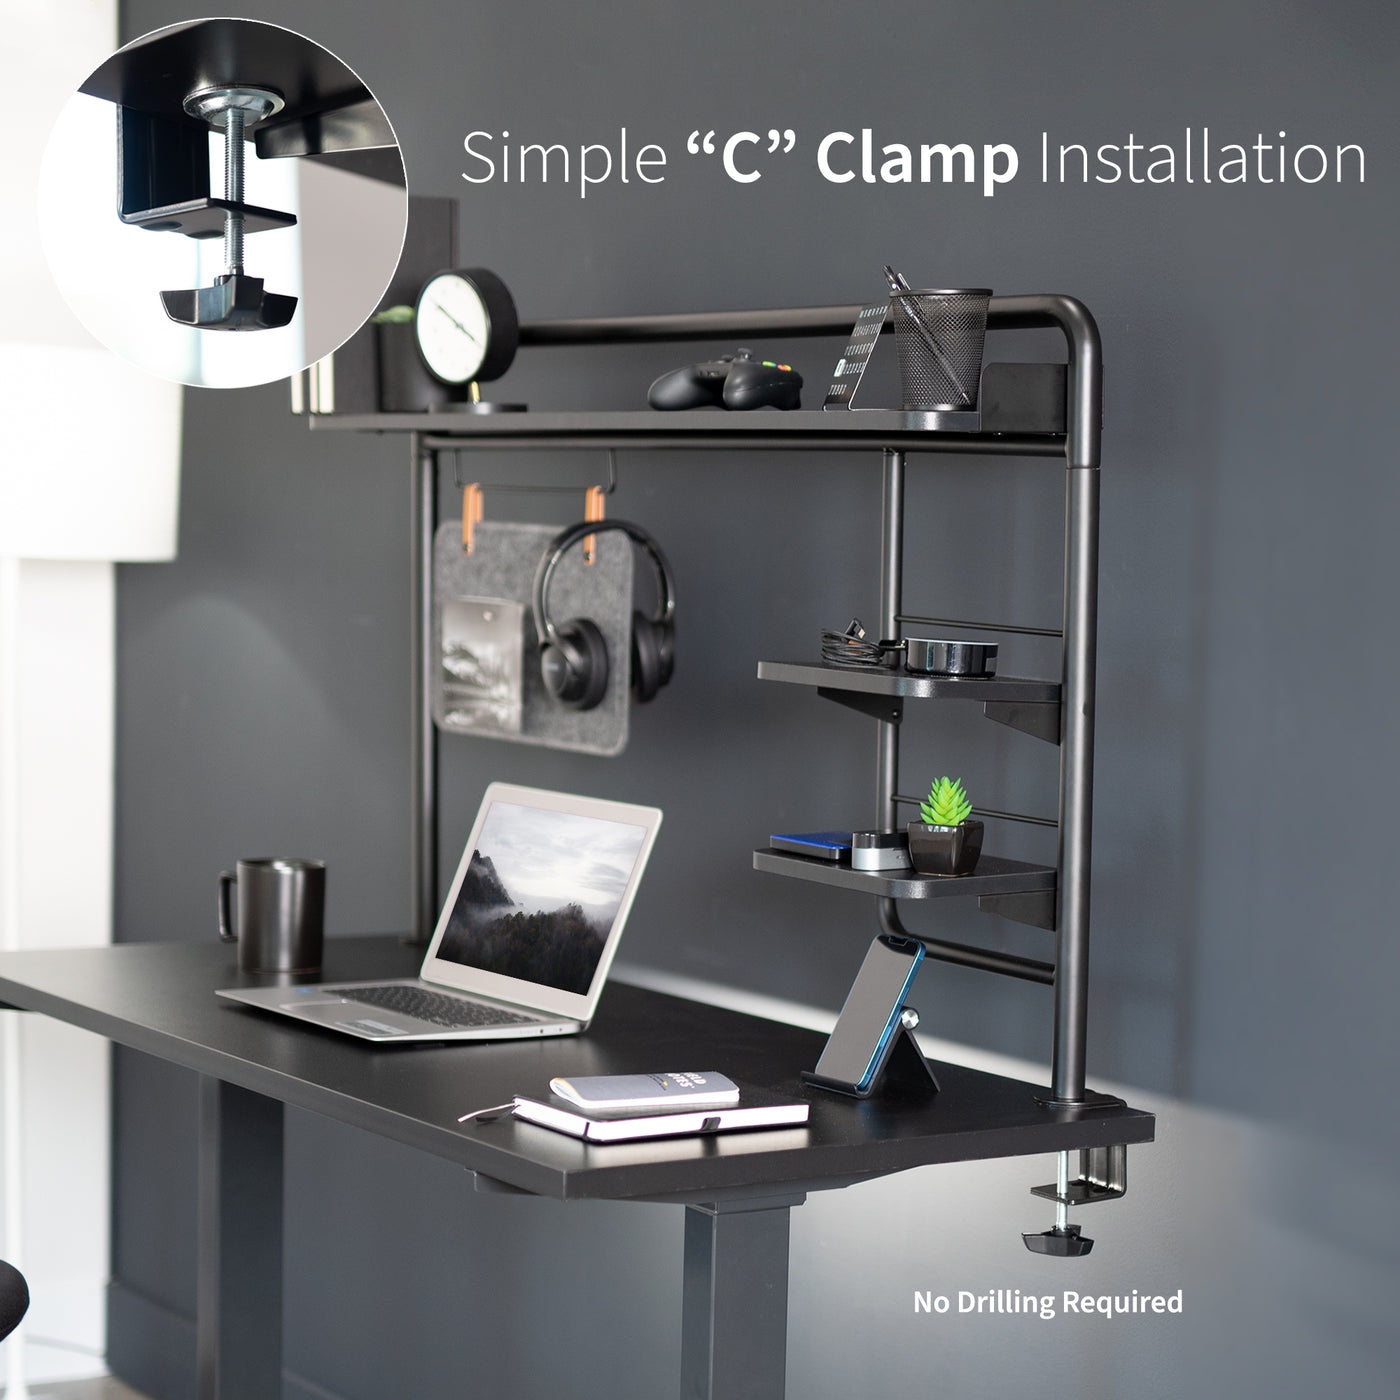 Clamp-on Desktop Shelving System with easy C-clamp installation for organizing office workspaces.